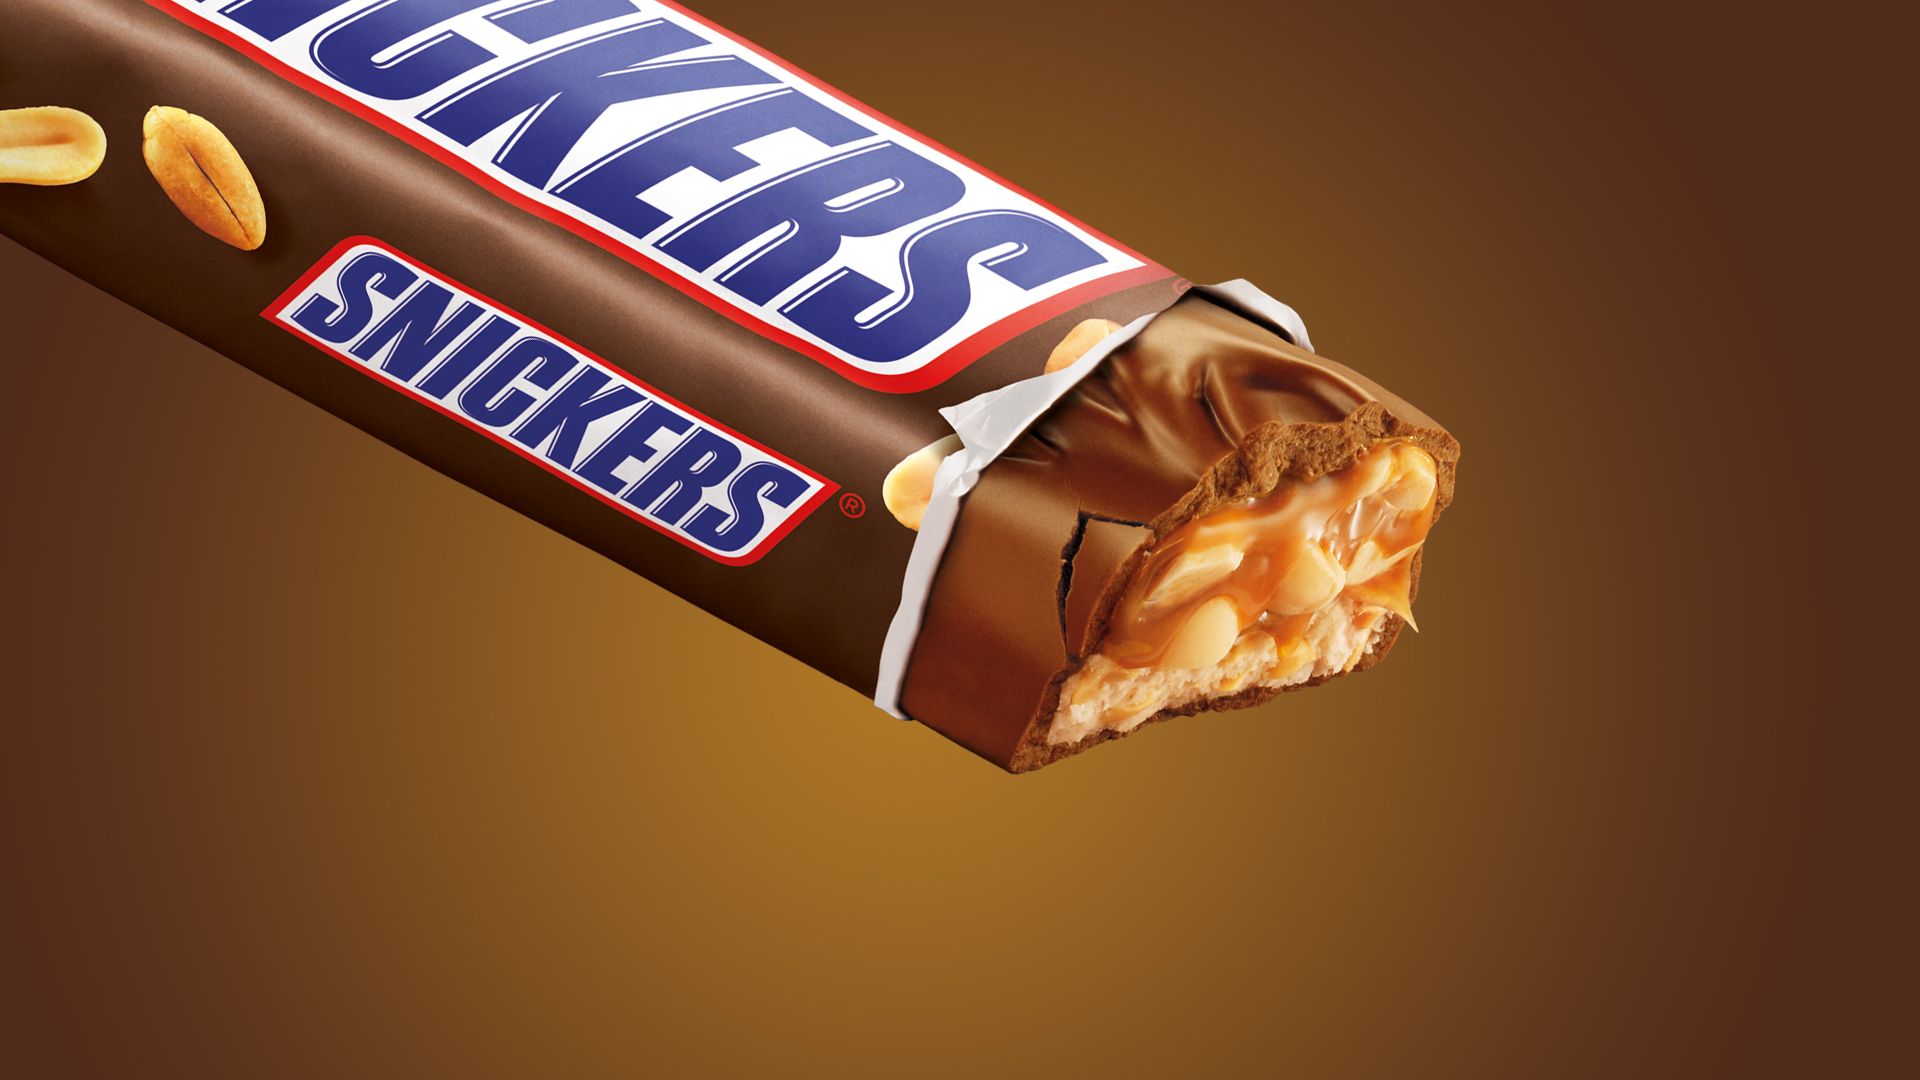 Snickers Candy Bar Wallpaper 66285 1920x1080px